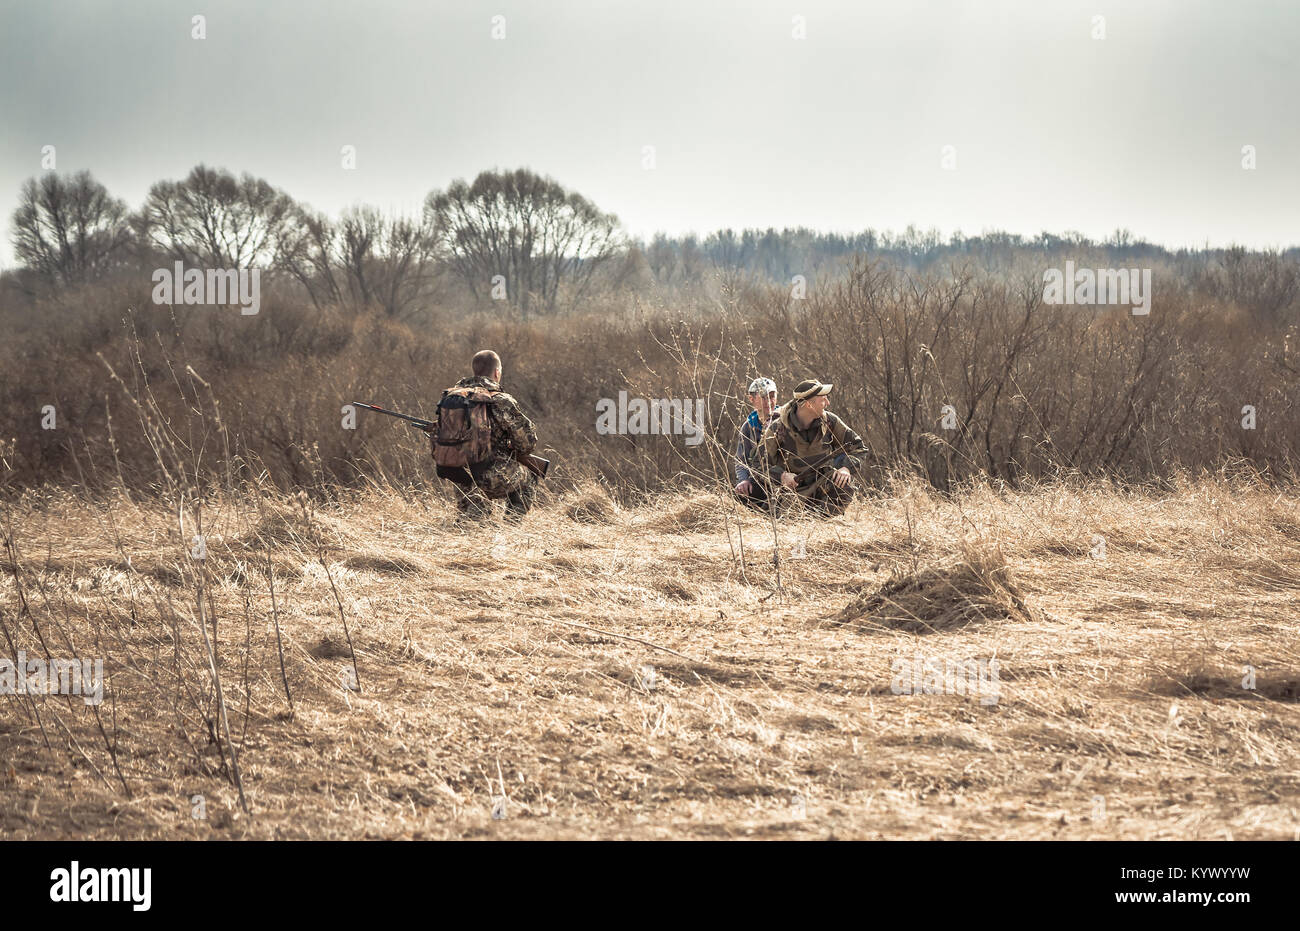 Hunting scene with hunters in rural field with dry grass during hunting season Stock Photo